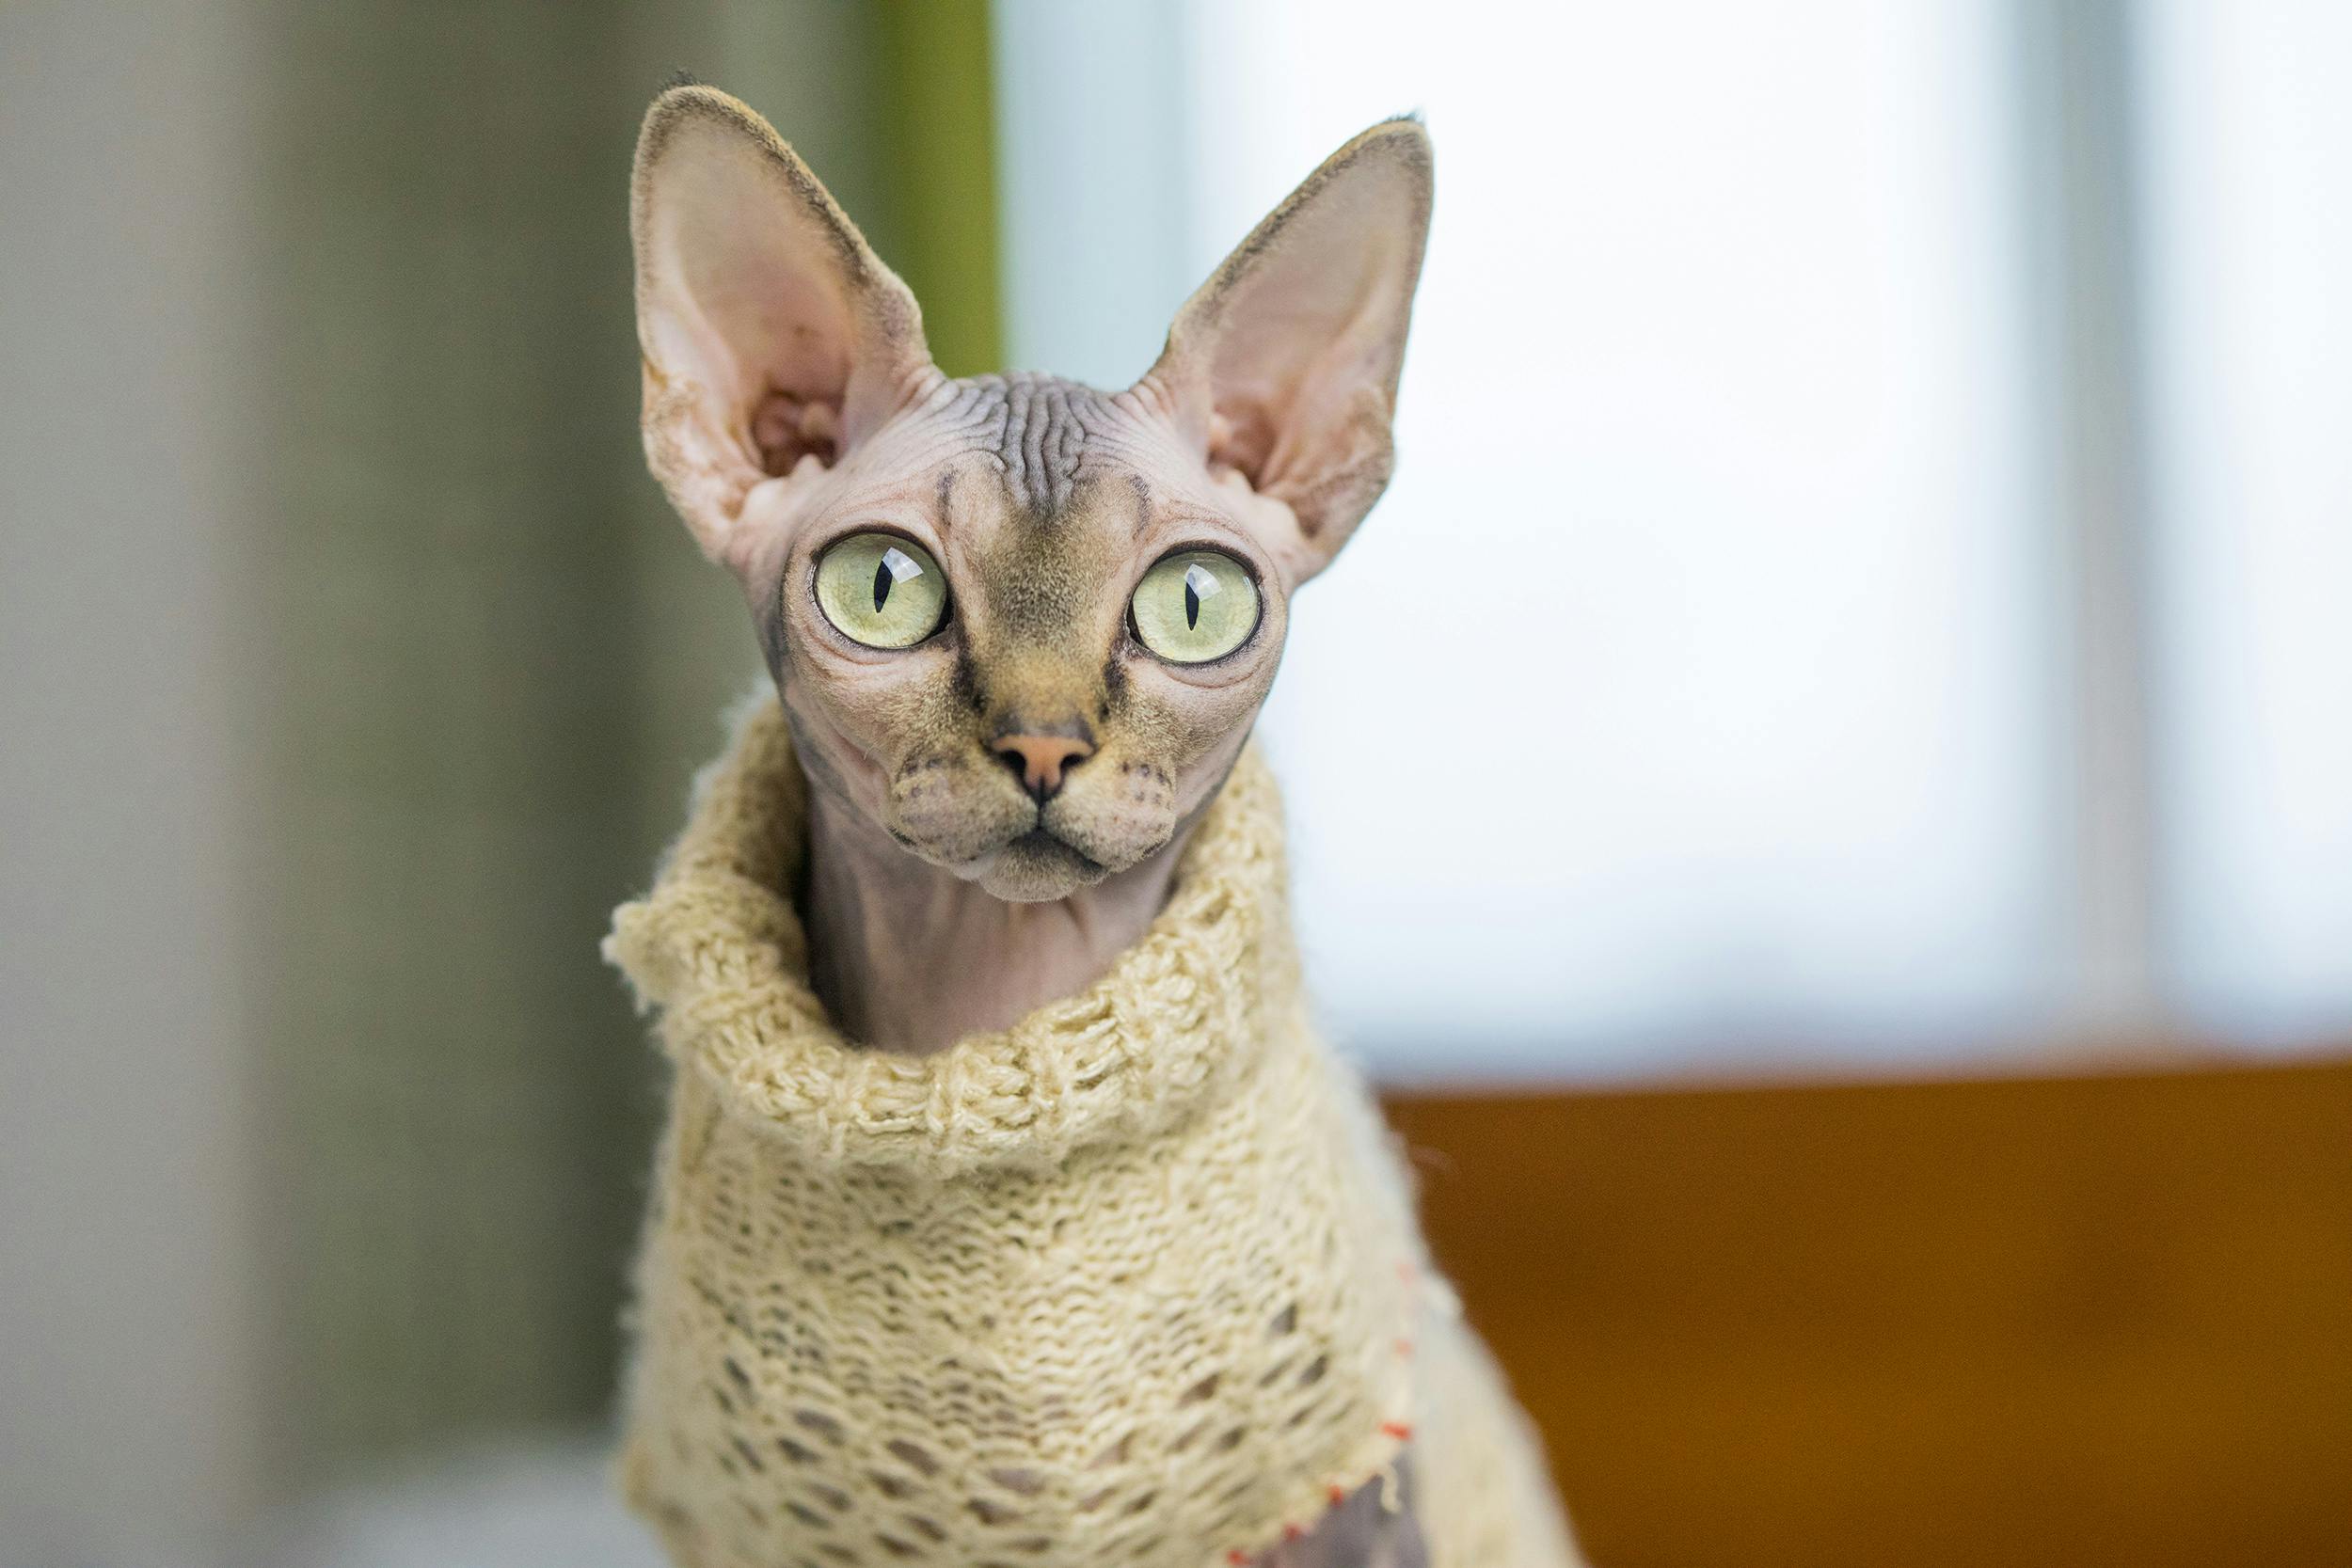 Hairless cat wearing a sweater.